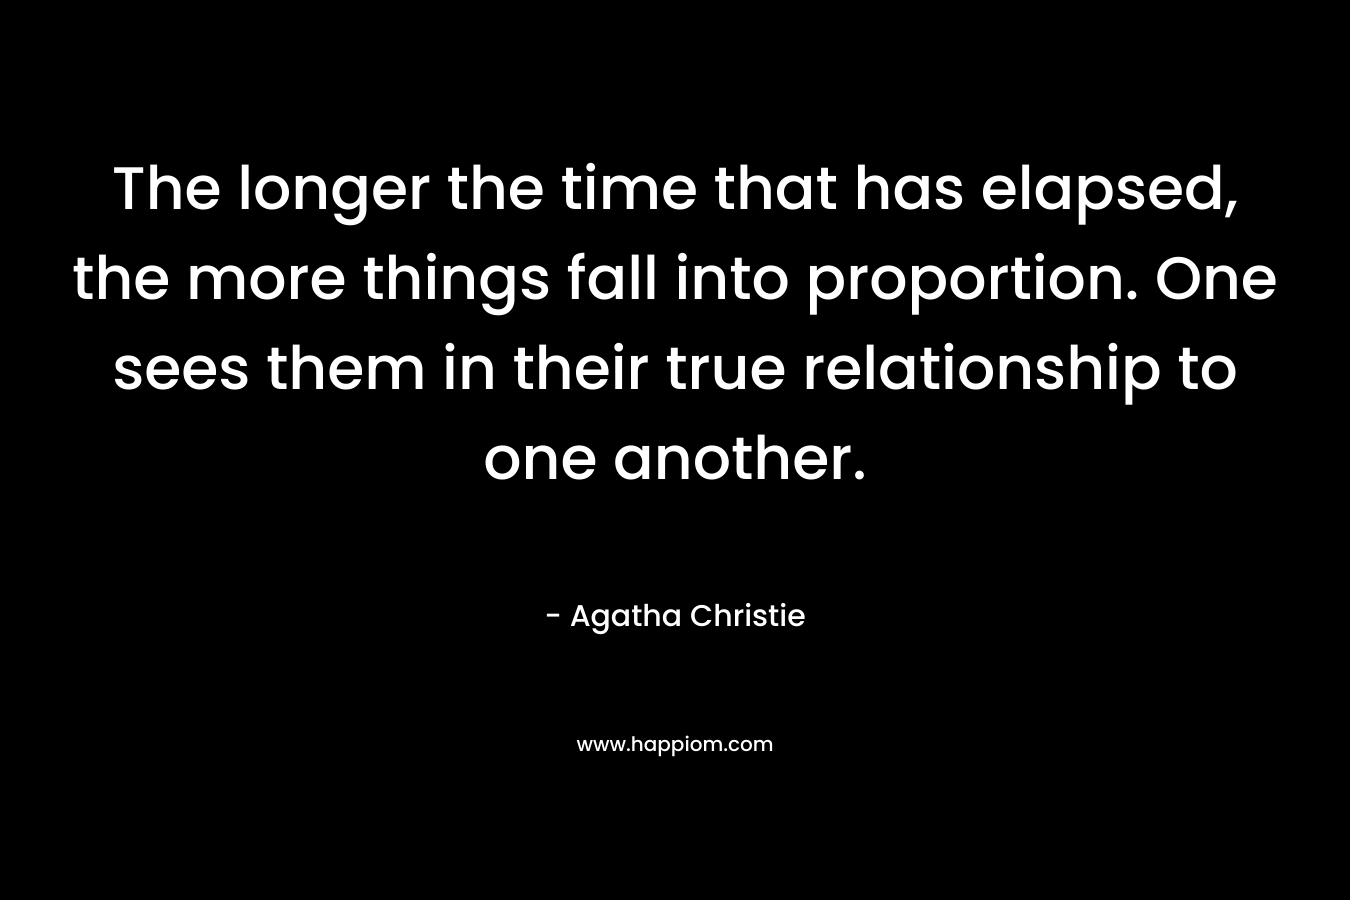 The longer the time that has elapsed, the more things fall into proportion. One sees them in their true relationship to one another.